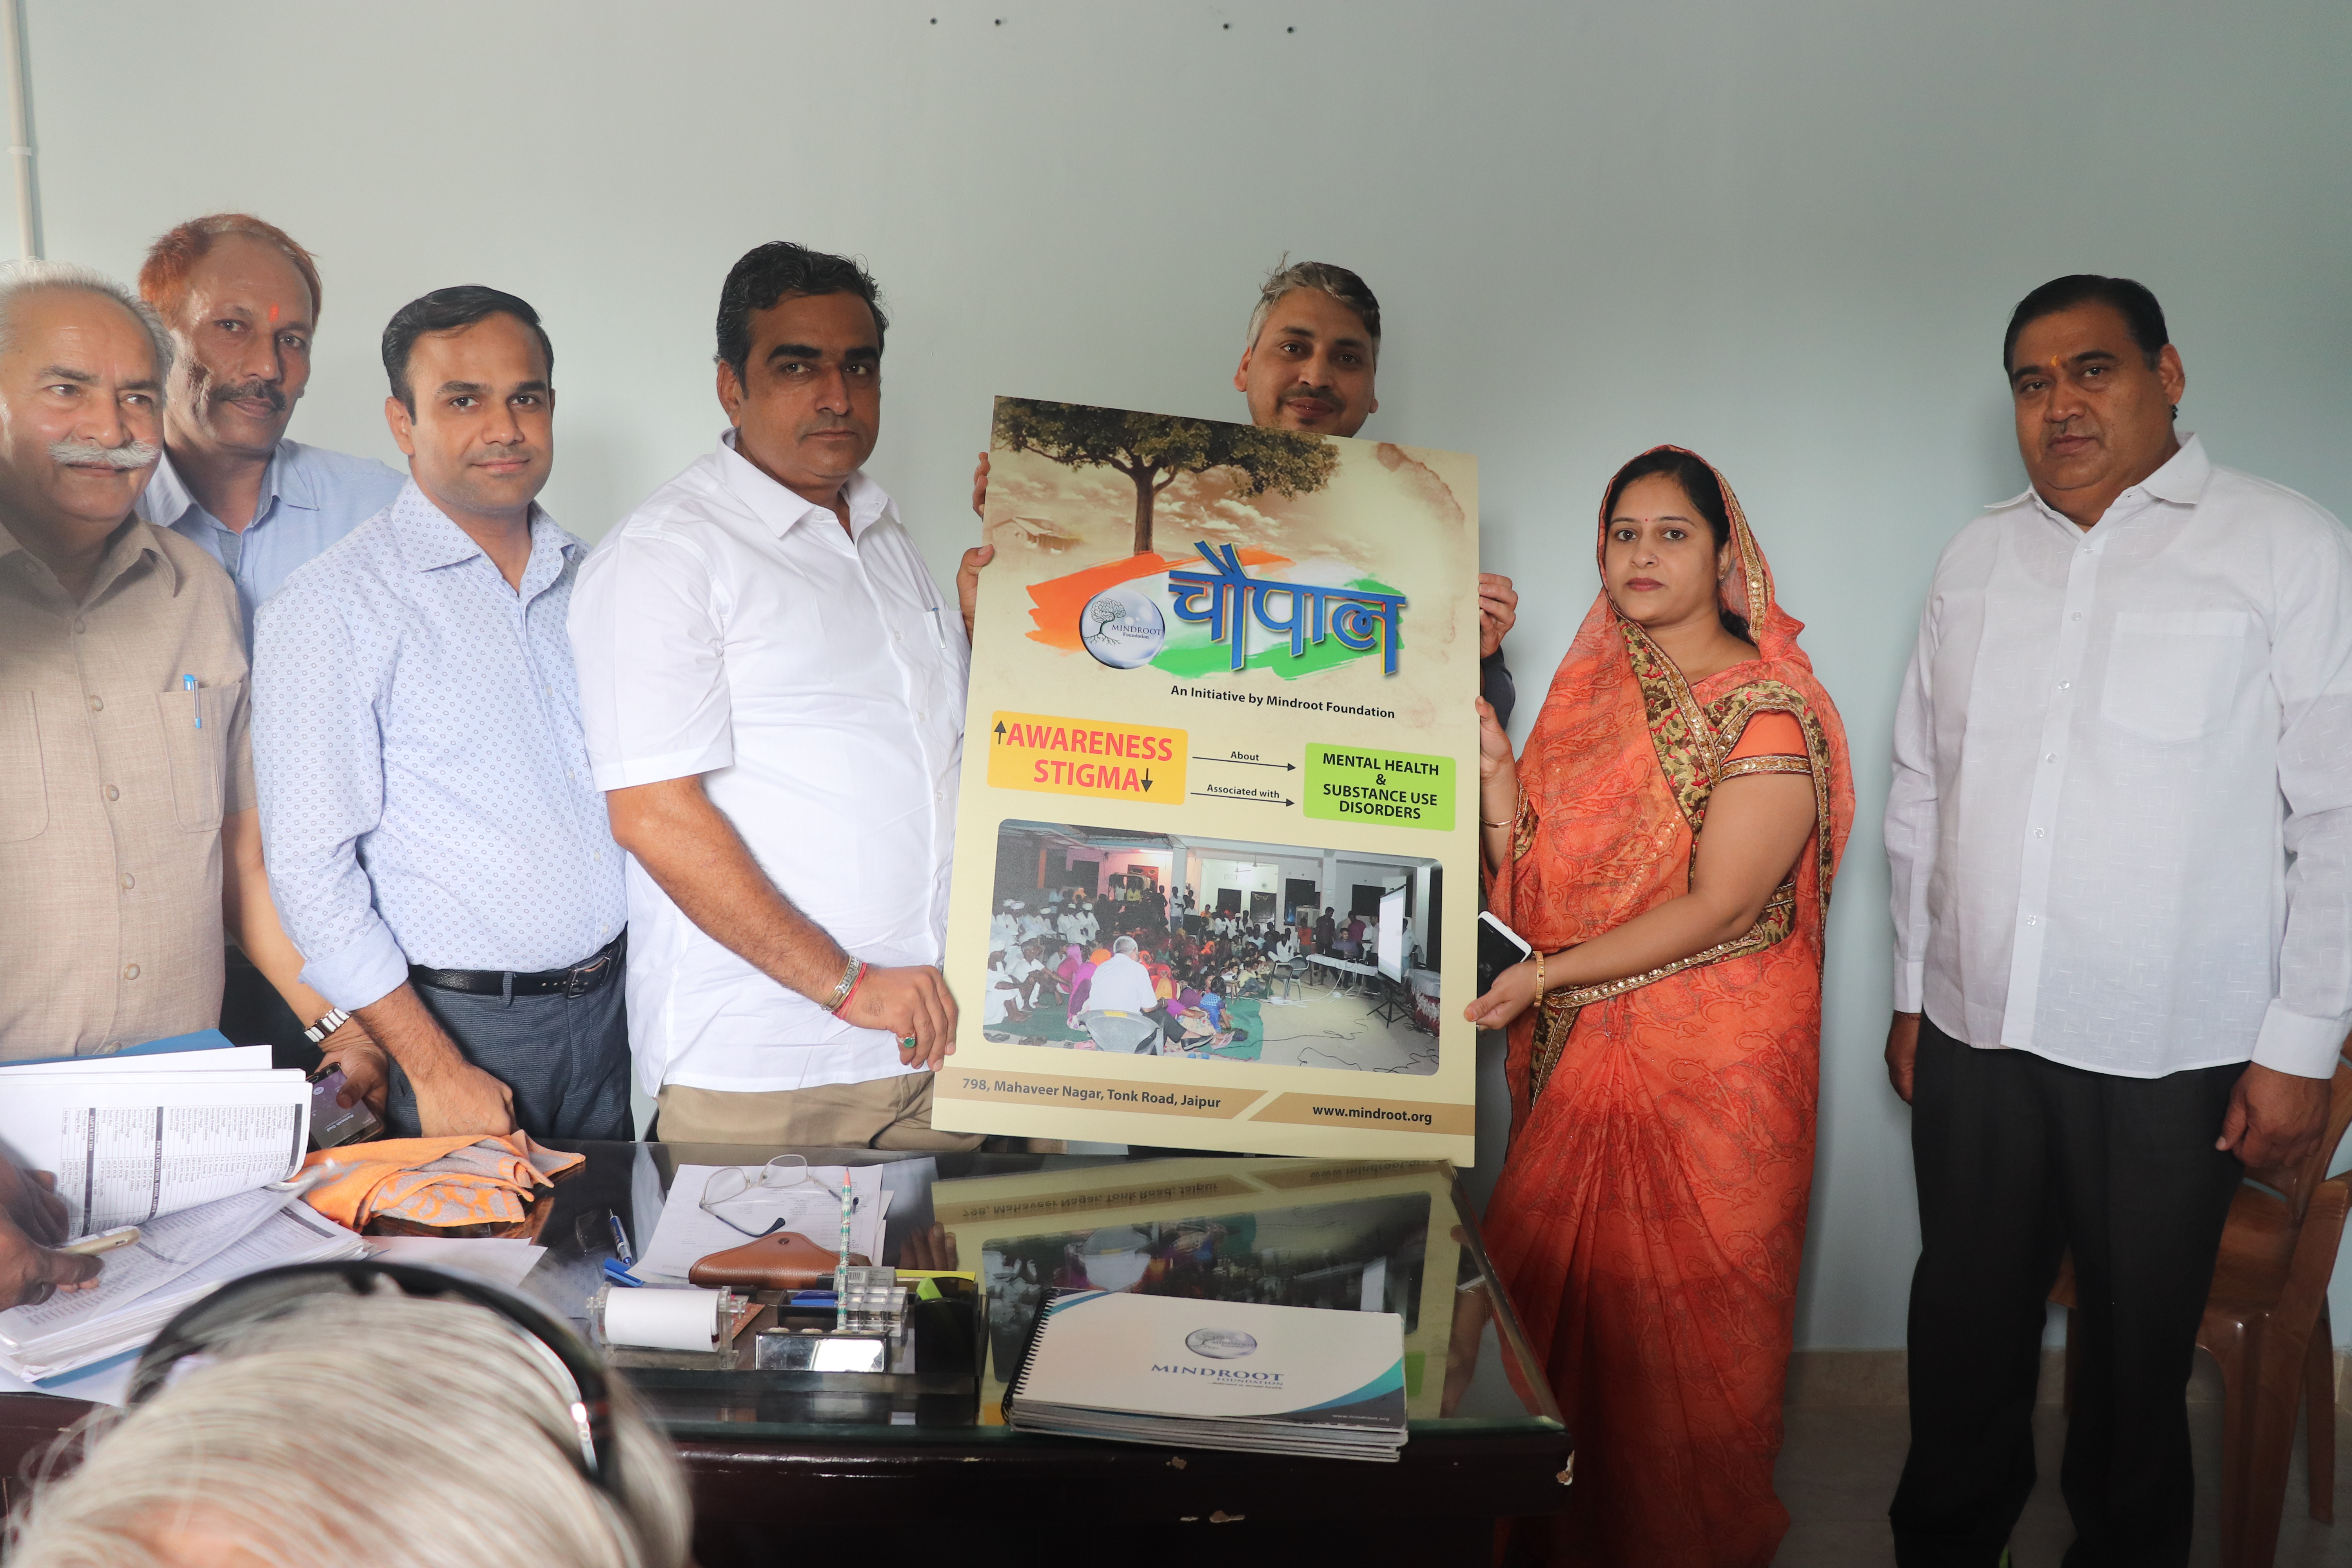 CHOPAL Poster inauguration by Cabinet Minister